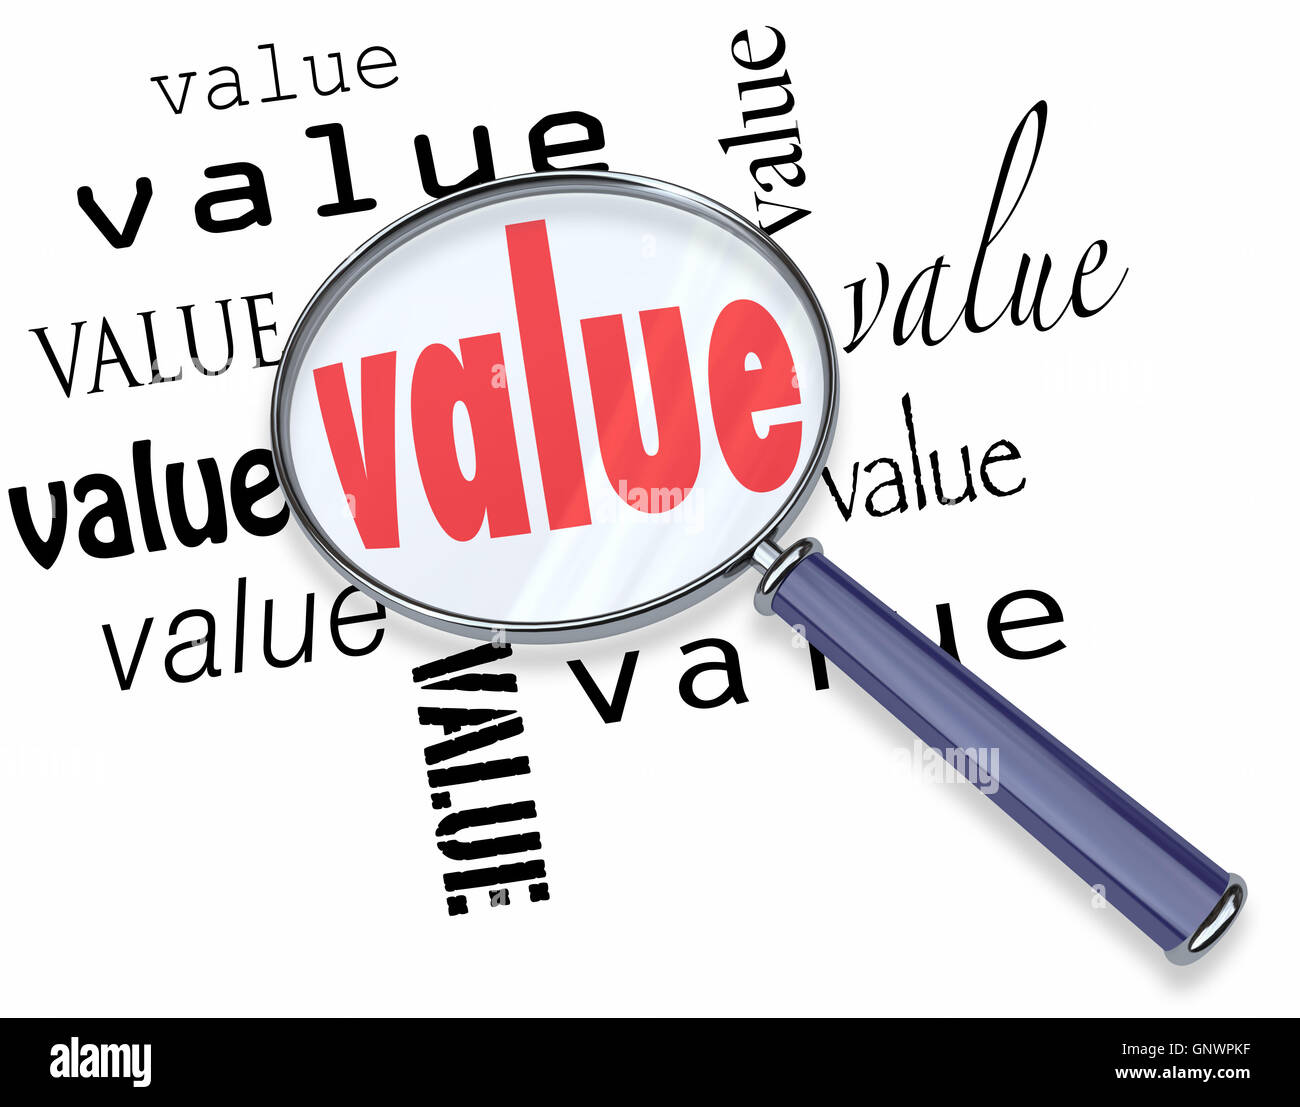 Searching for Value - Magnifying Glass to Find Valuable Savings Stock Photo